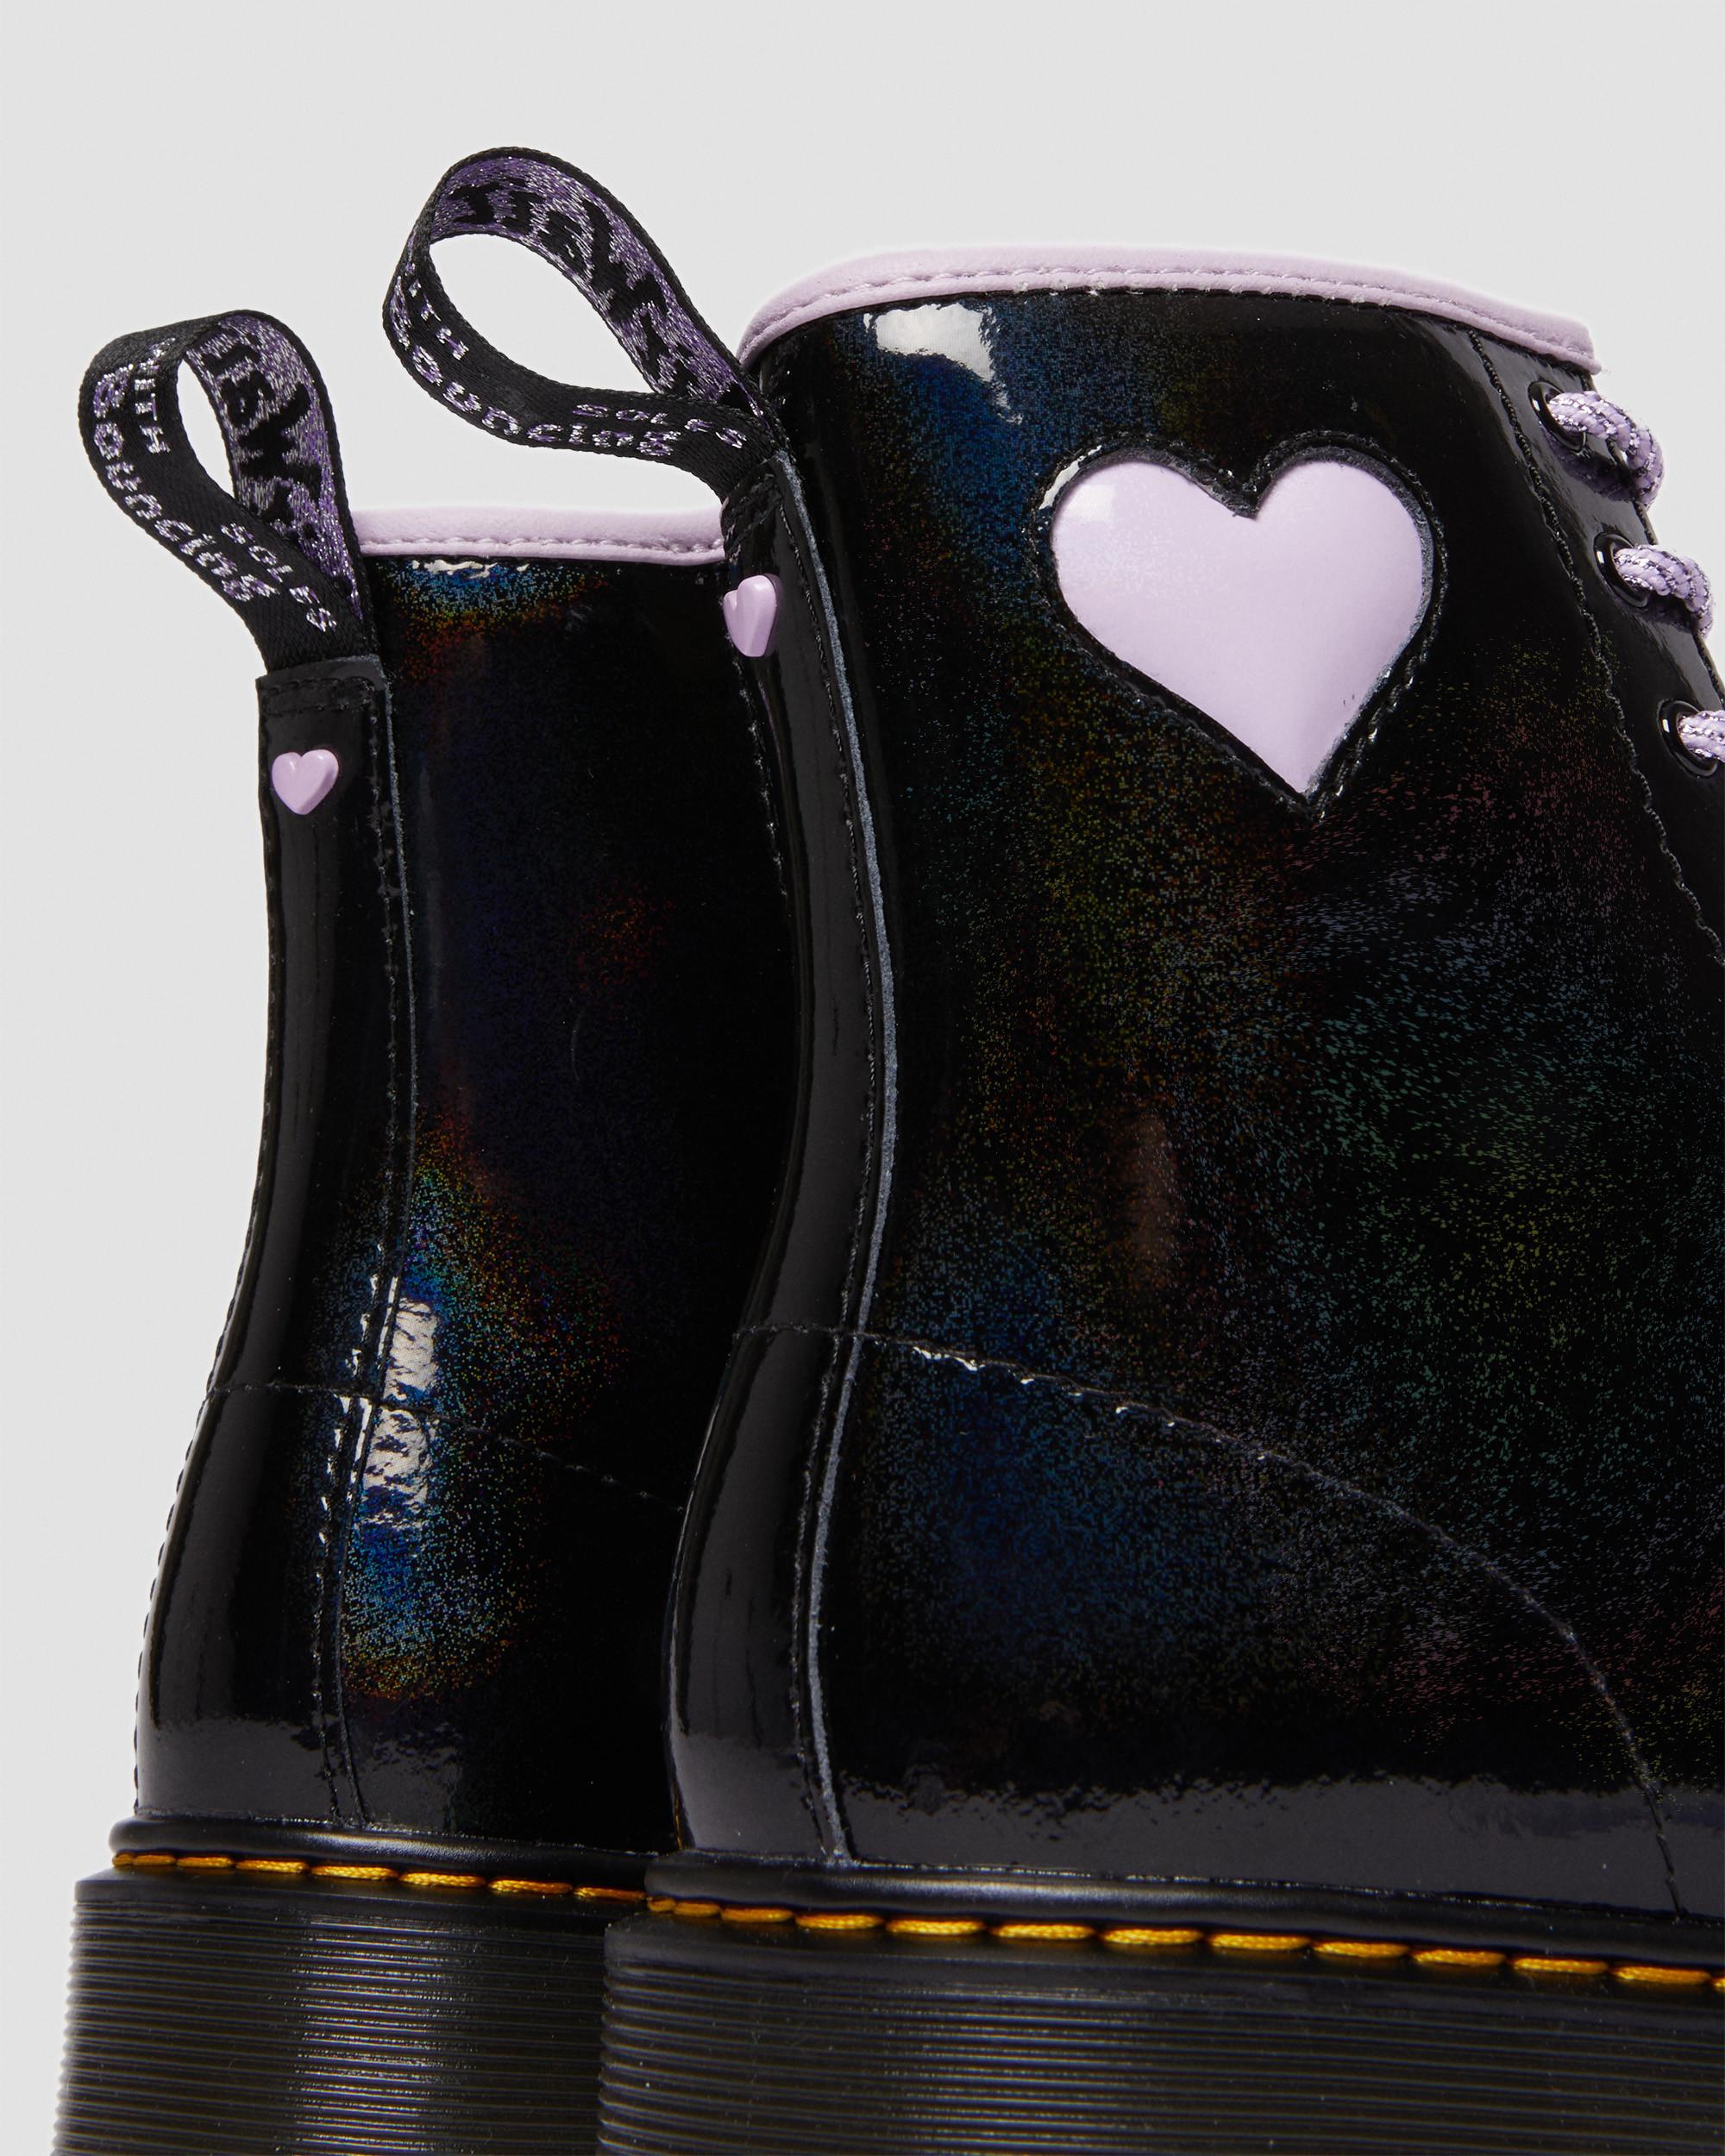 Martens Heart Boots in Up Youth | Dr. 1460 Black Lace Shimmer